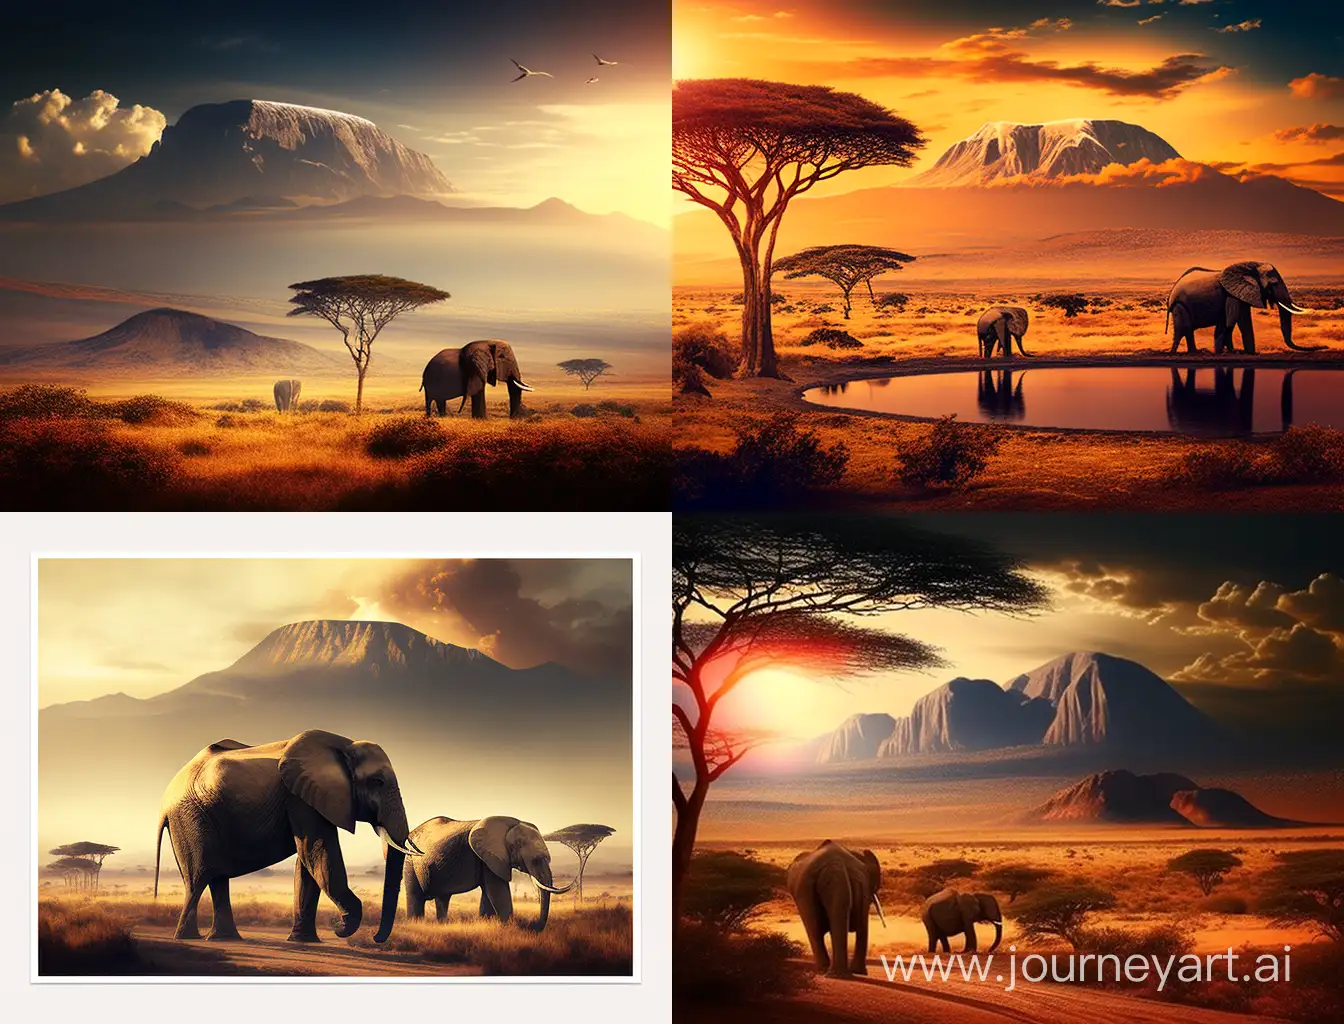 mount kenya with elephants and a warm glowing savannah sun and landscape